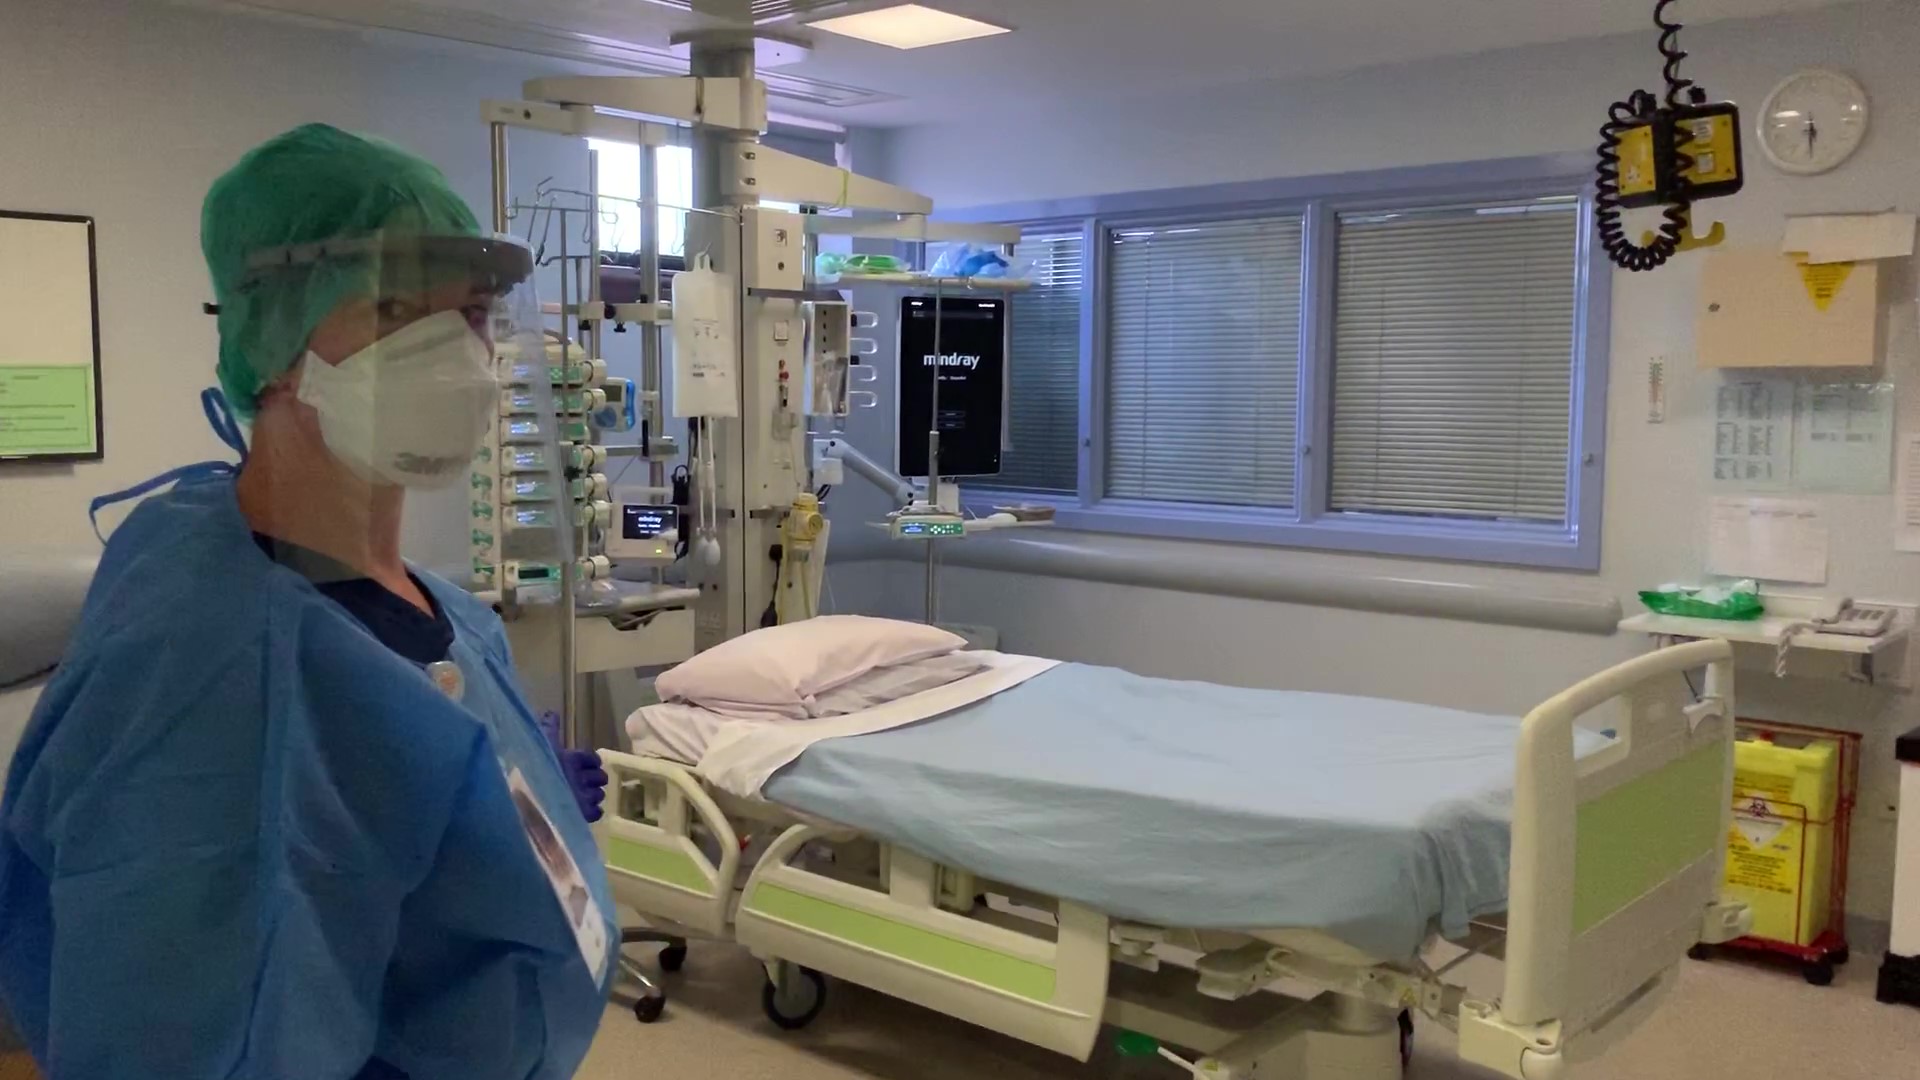 COVID-19 intensive care video helps families